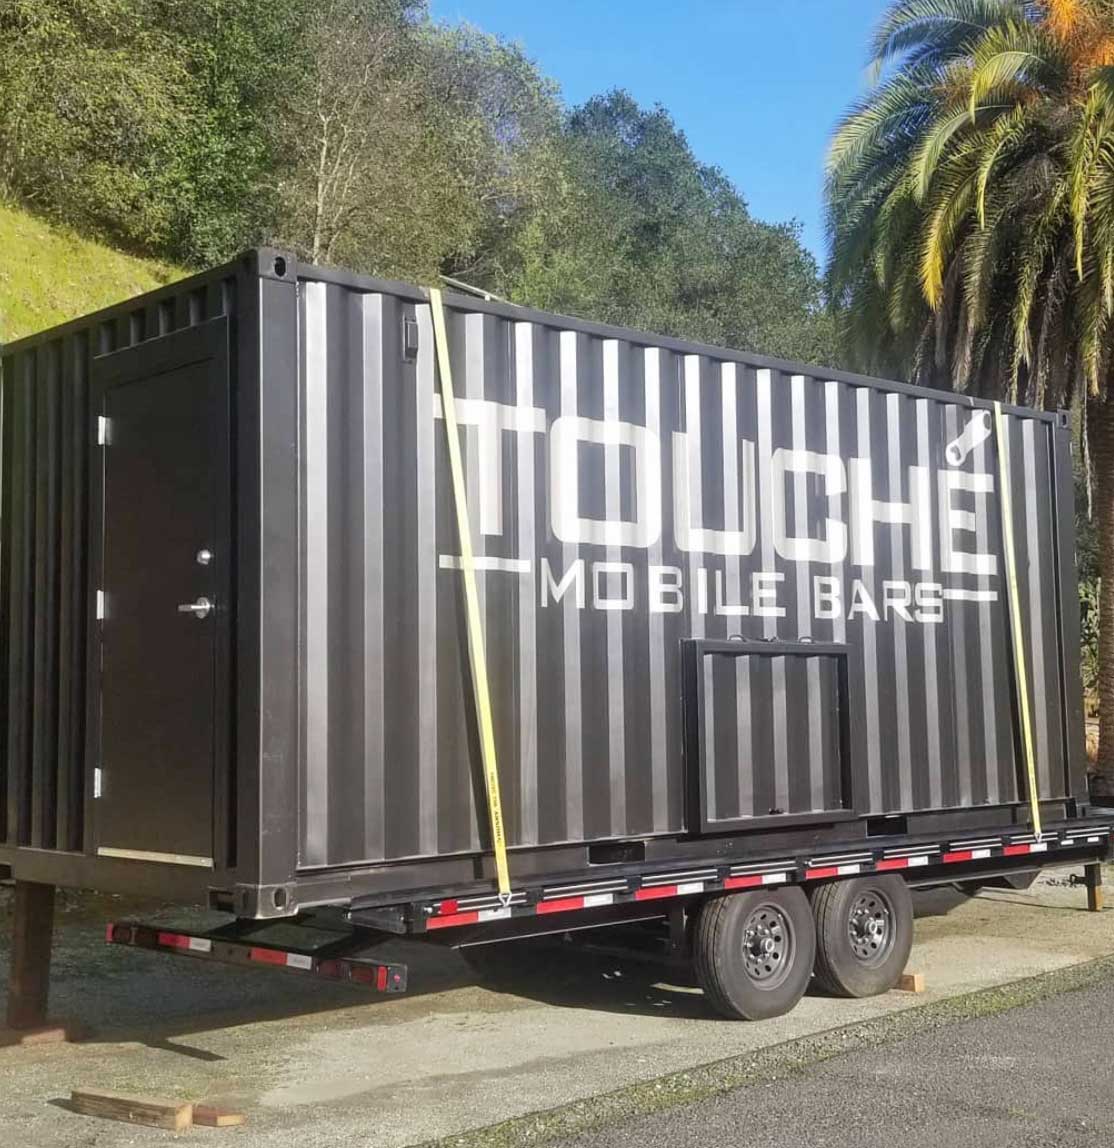 ROXBOX Containers custom shipping container mobile bar built for Touché Mobile Bars in the San Francisco Bay Area.